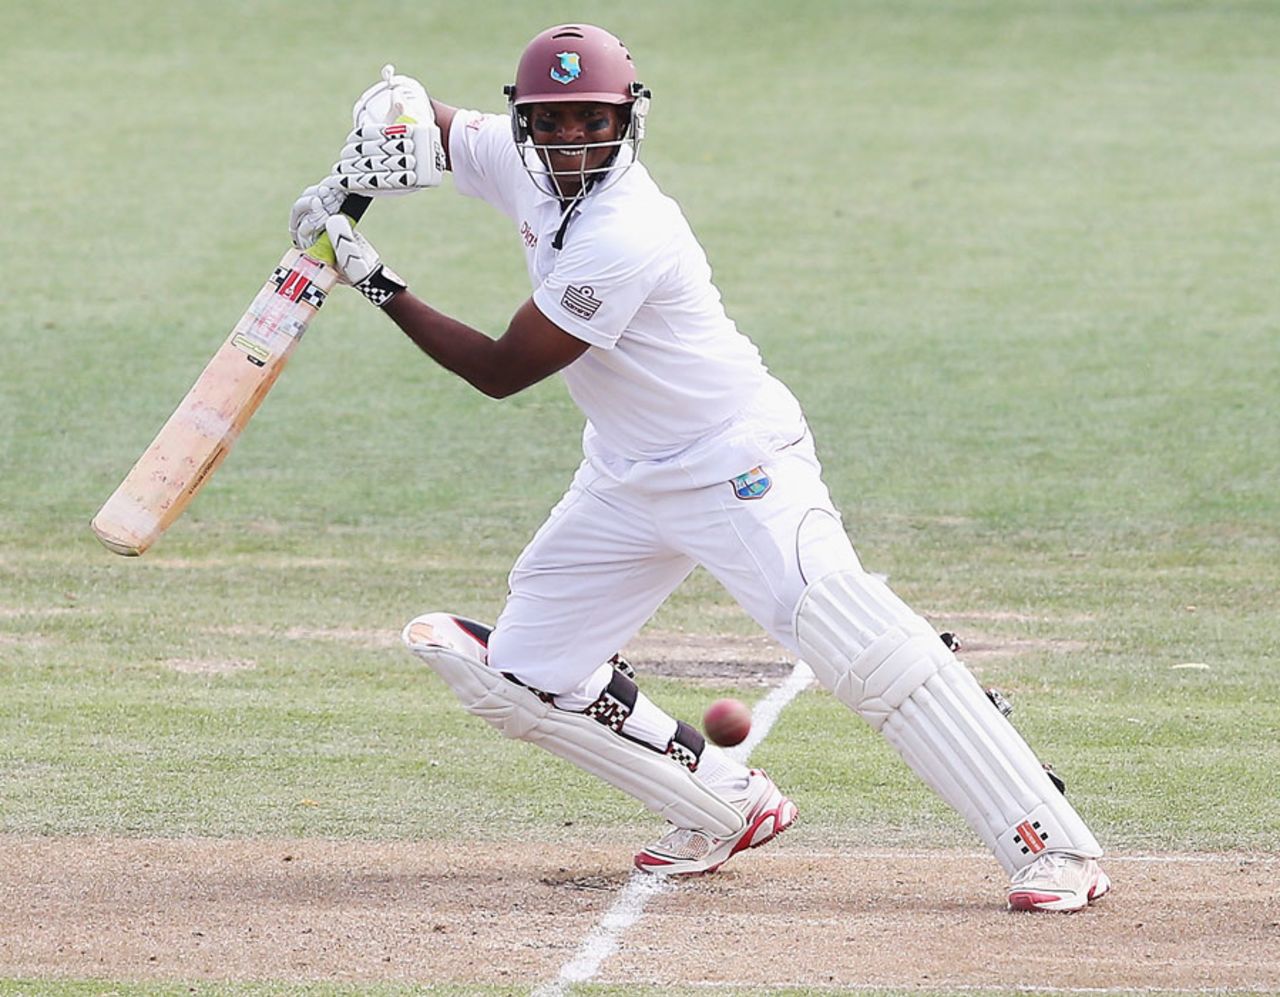 Shivnarine Chanderpaul finished the first day unbeaten on 94, New Zealand v West Indies, 3rd Test, Hamilton, 1st day, December 19, 2013